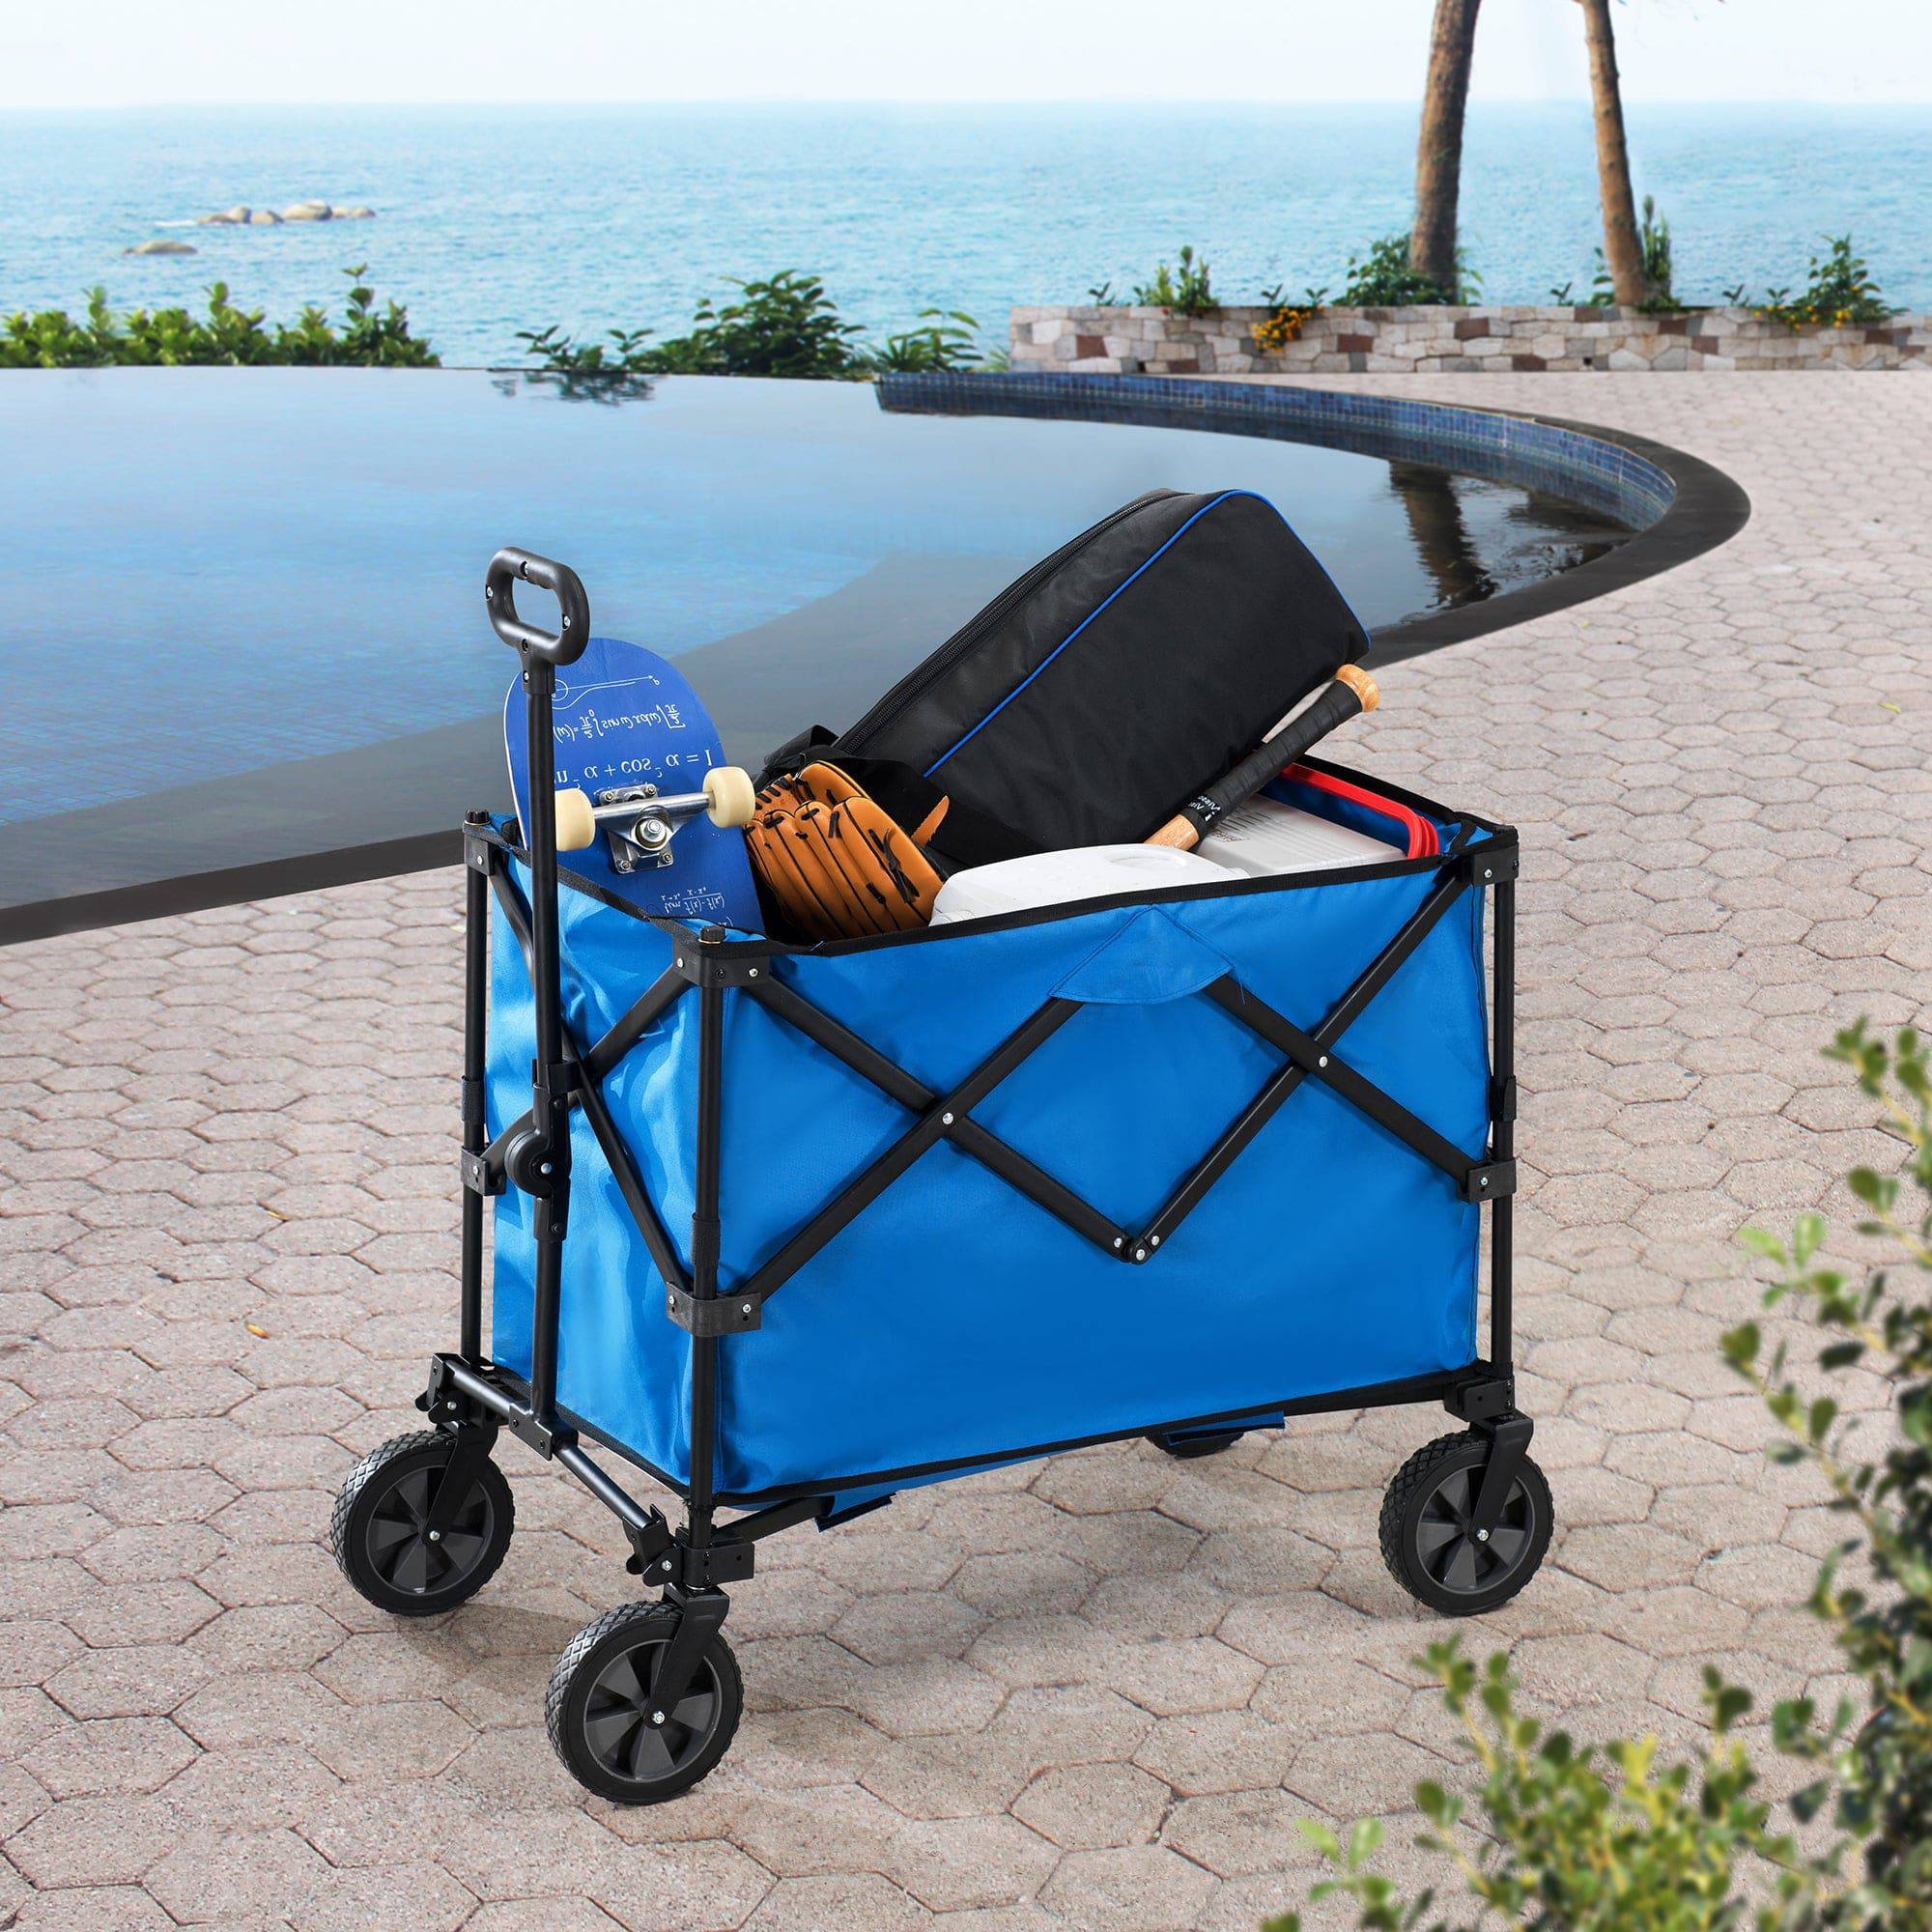 Sunjoy Collapsible Folding Wagon Cart with 255L Oversized Capacity and Big Wheels